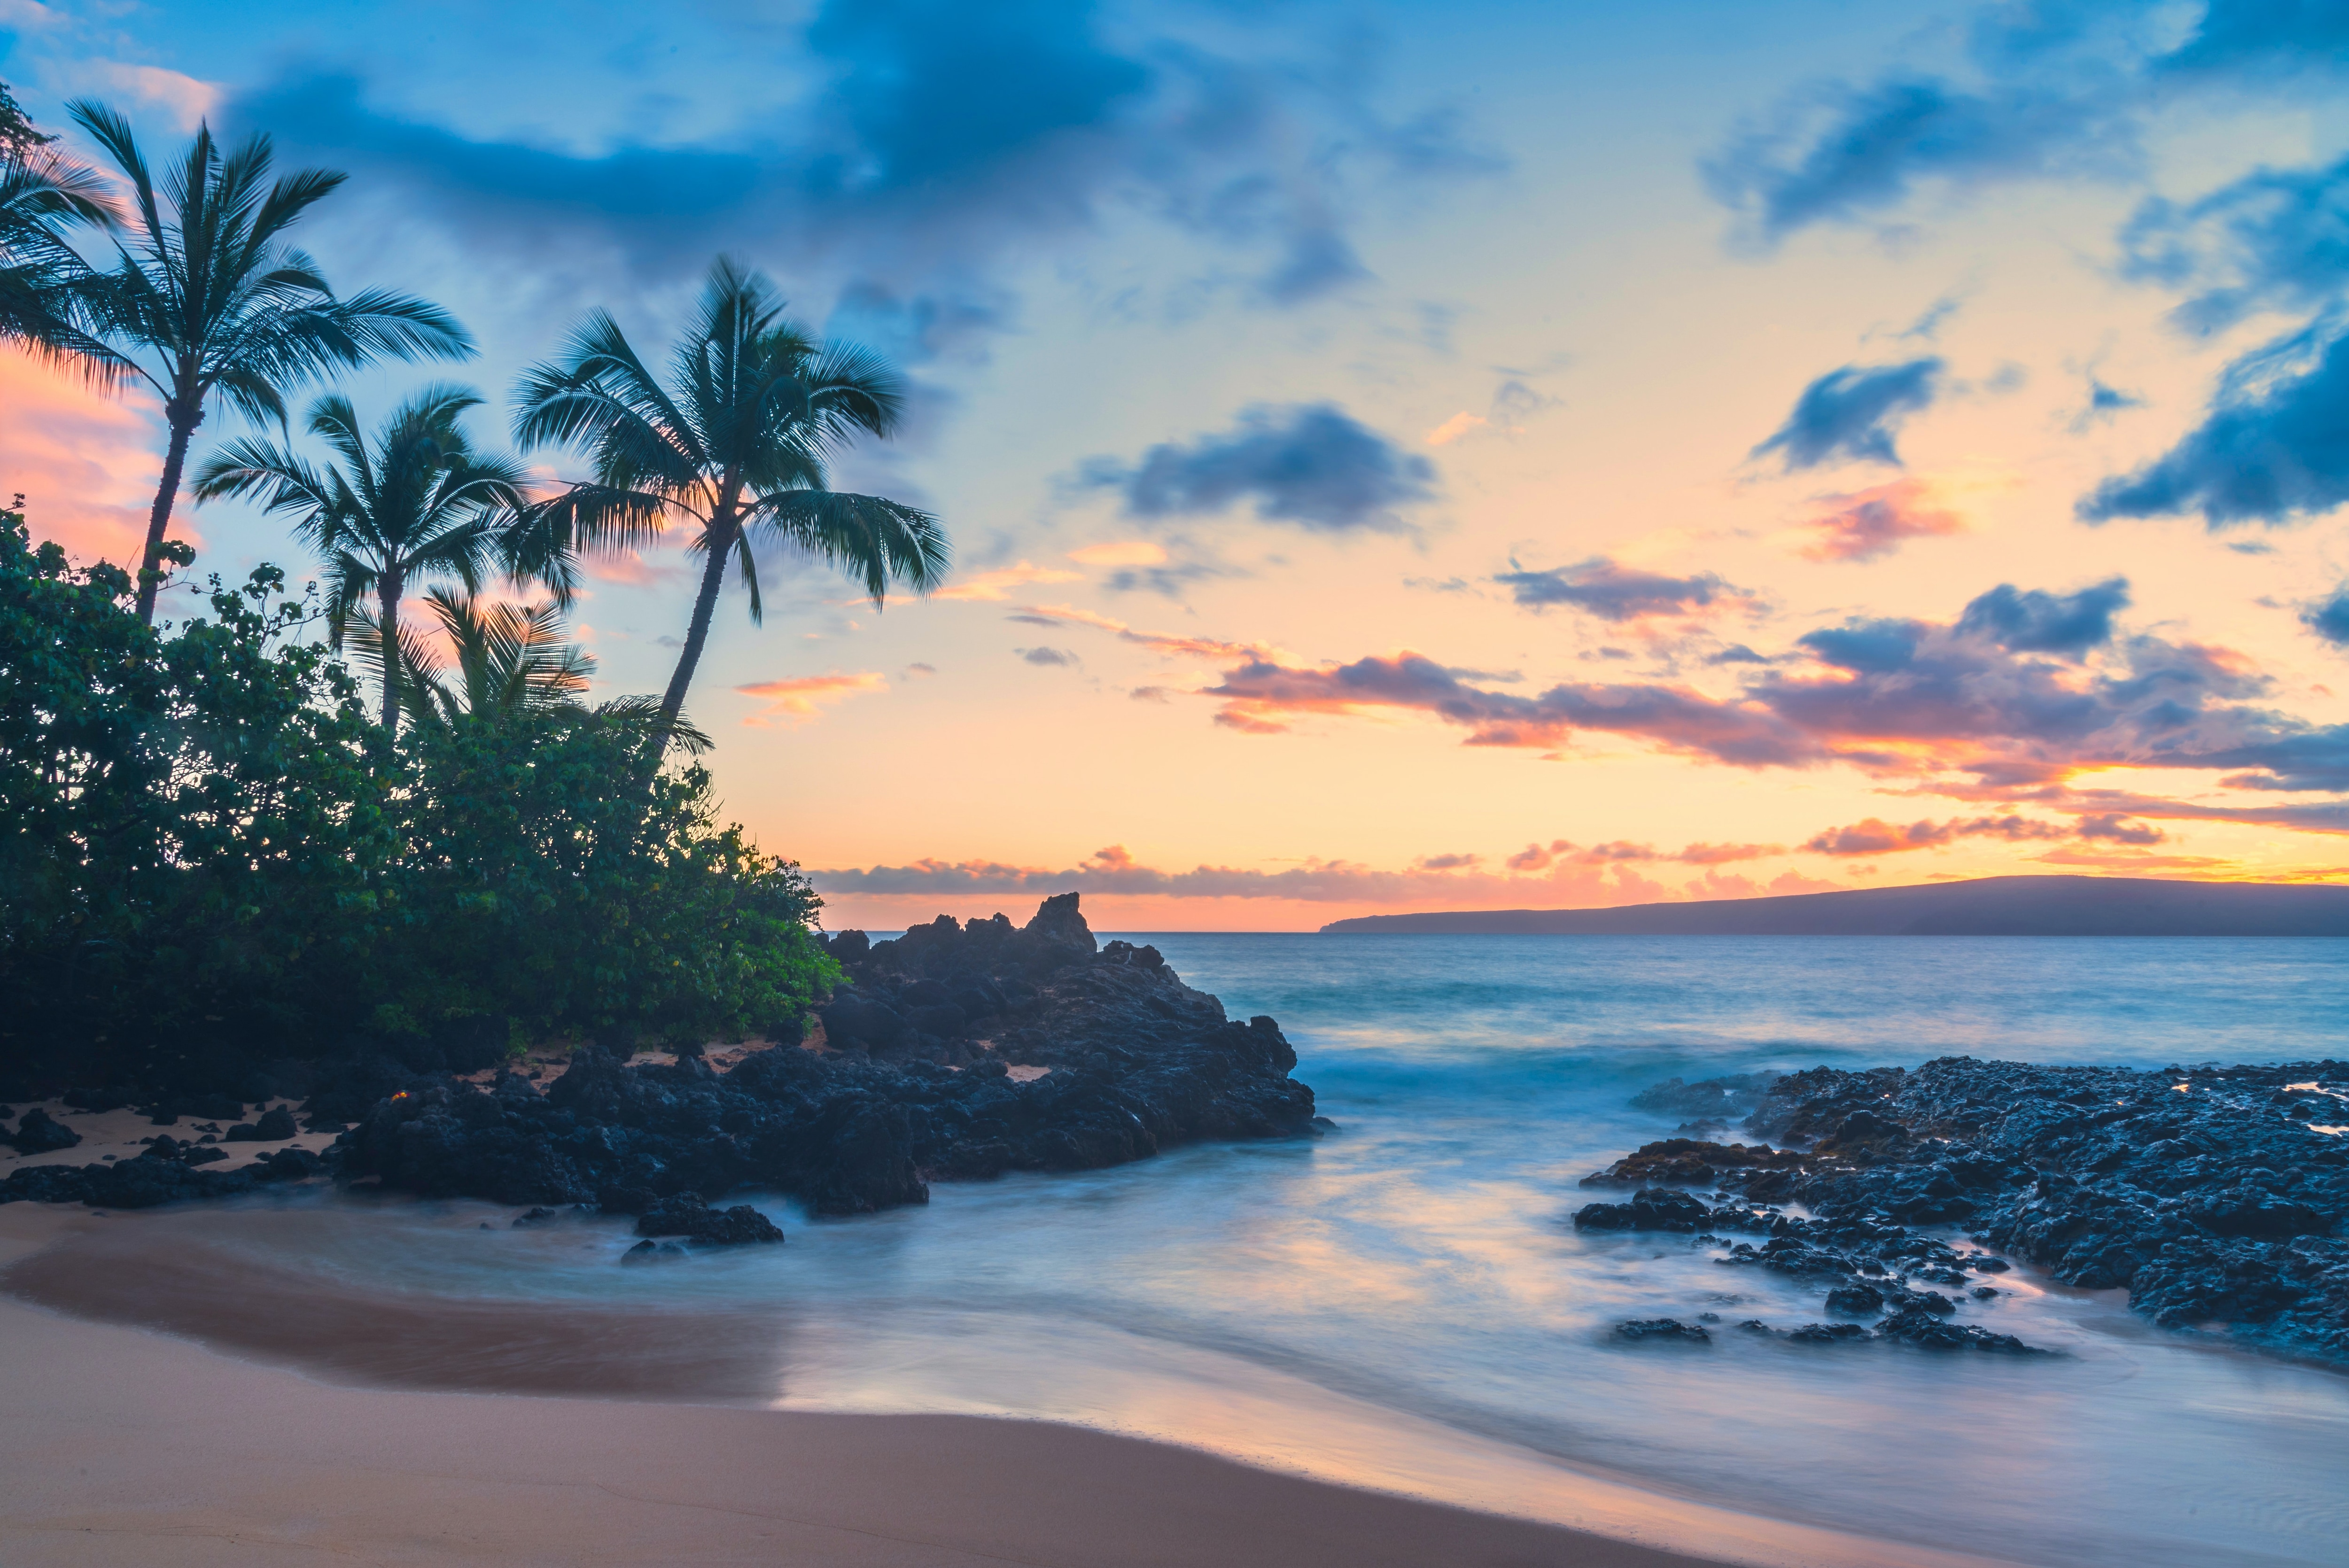 Head to Maui if you want few excursions over the Thanksgiving holiday.(Unsplash)